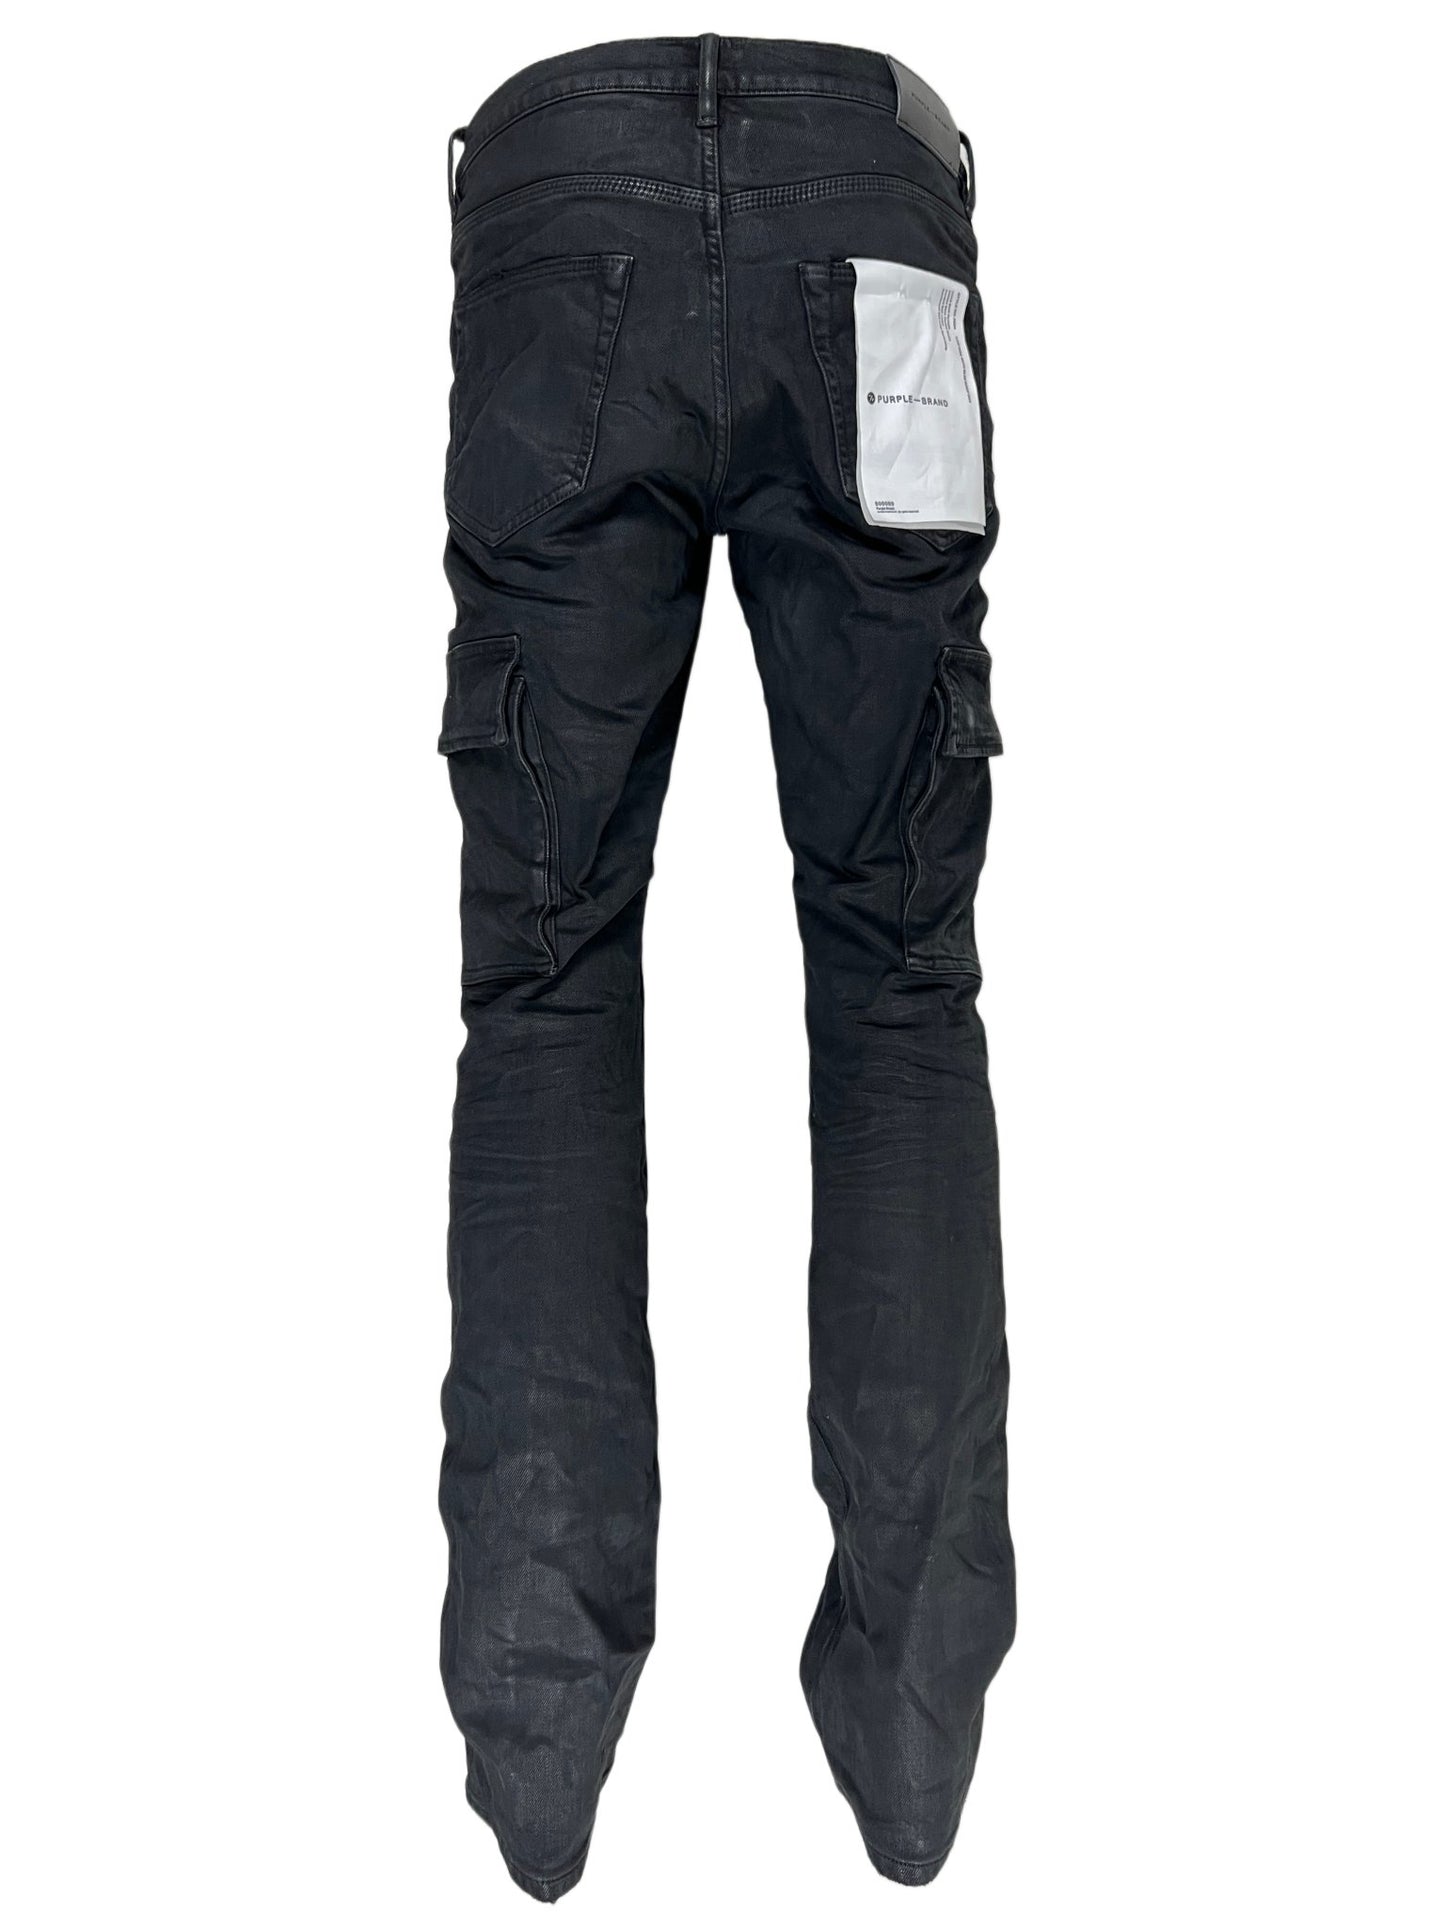 The back view of a pair of PURPLE BRAND JEANS P004-BLRC BLACK RESIN CARGO FLARE pants with a waxed finish.